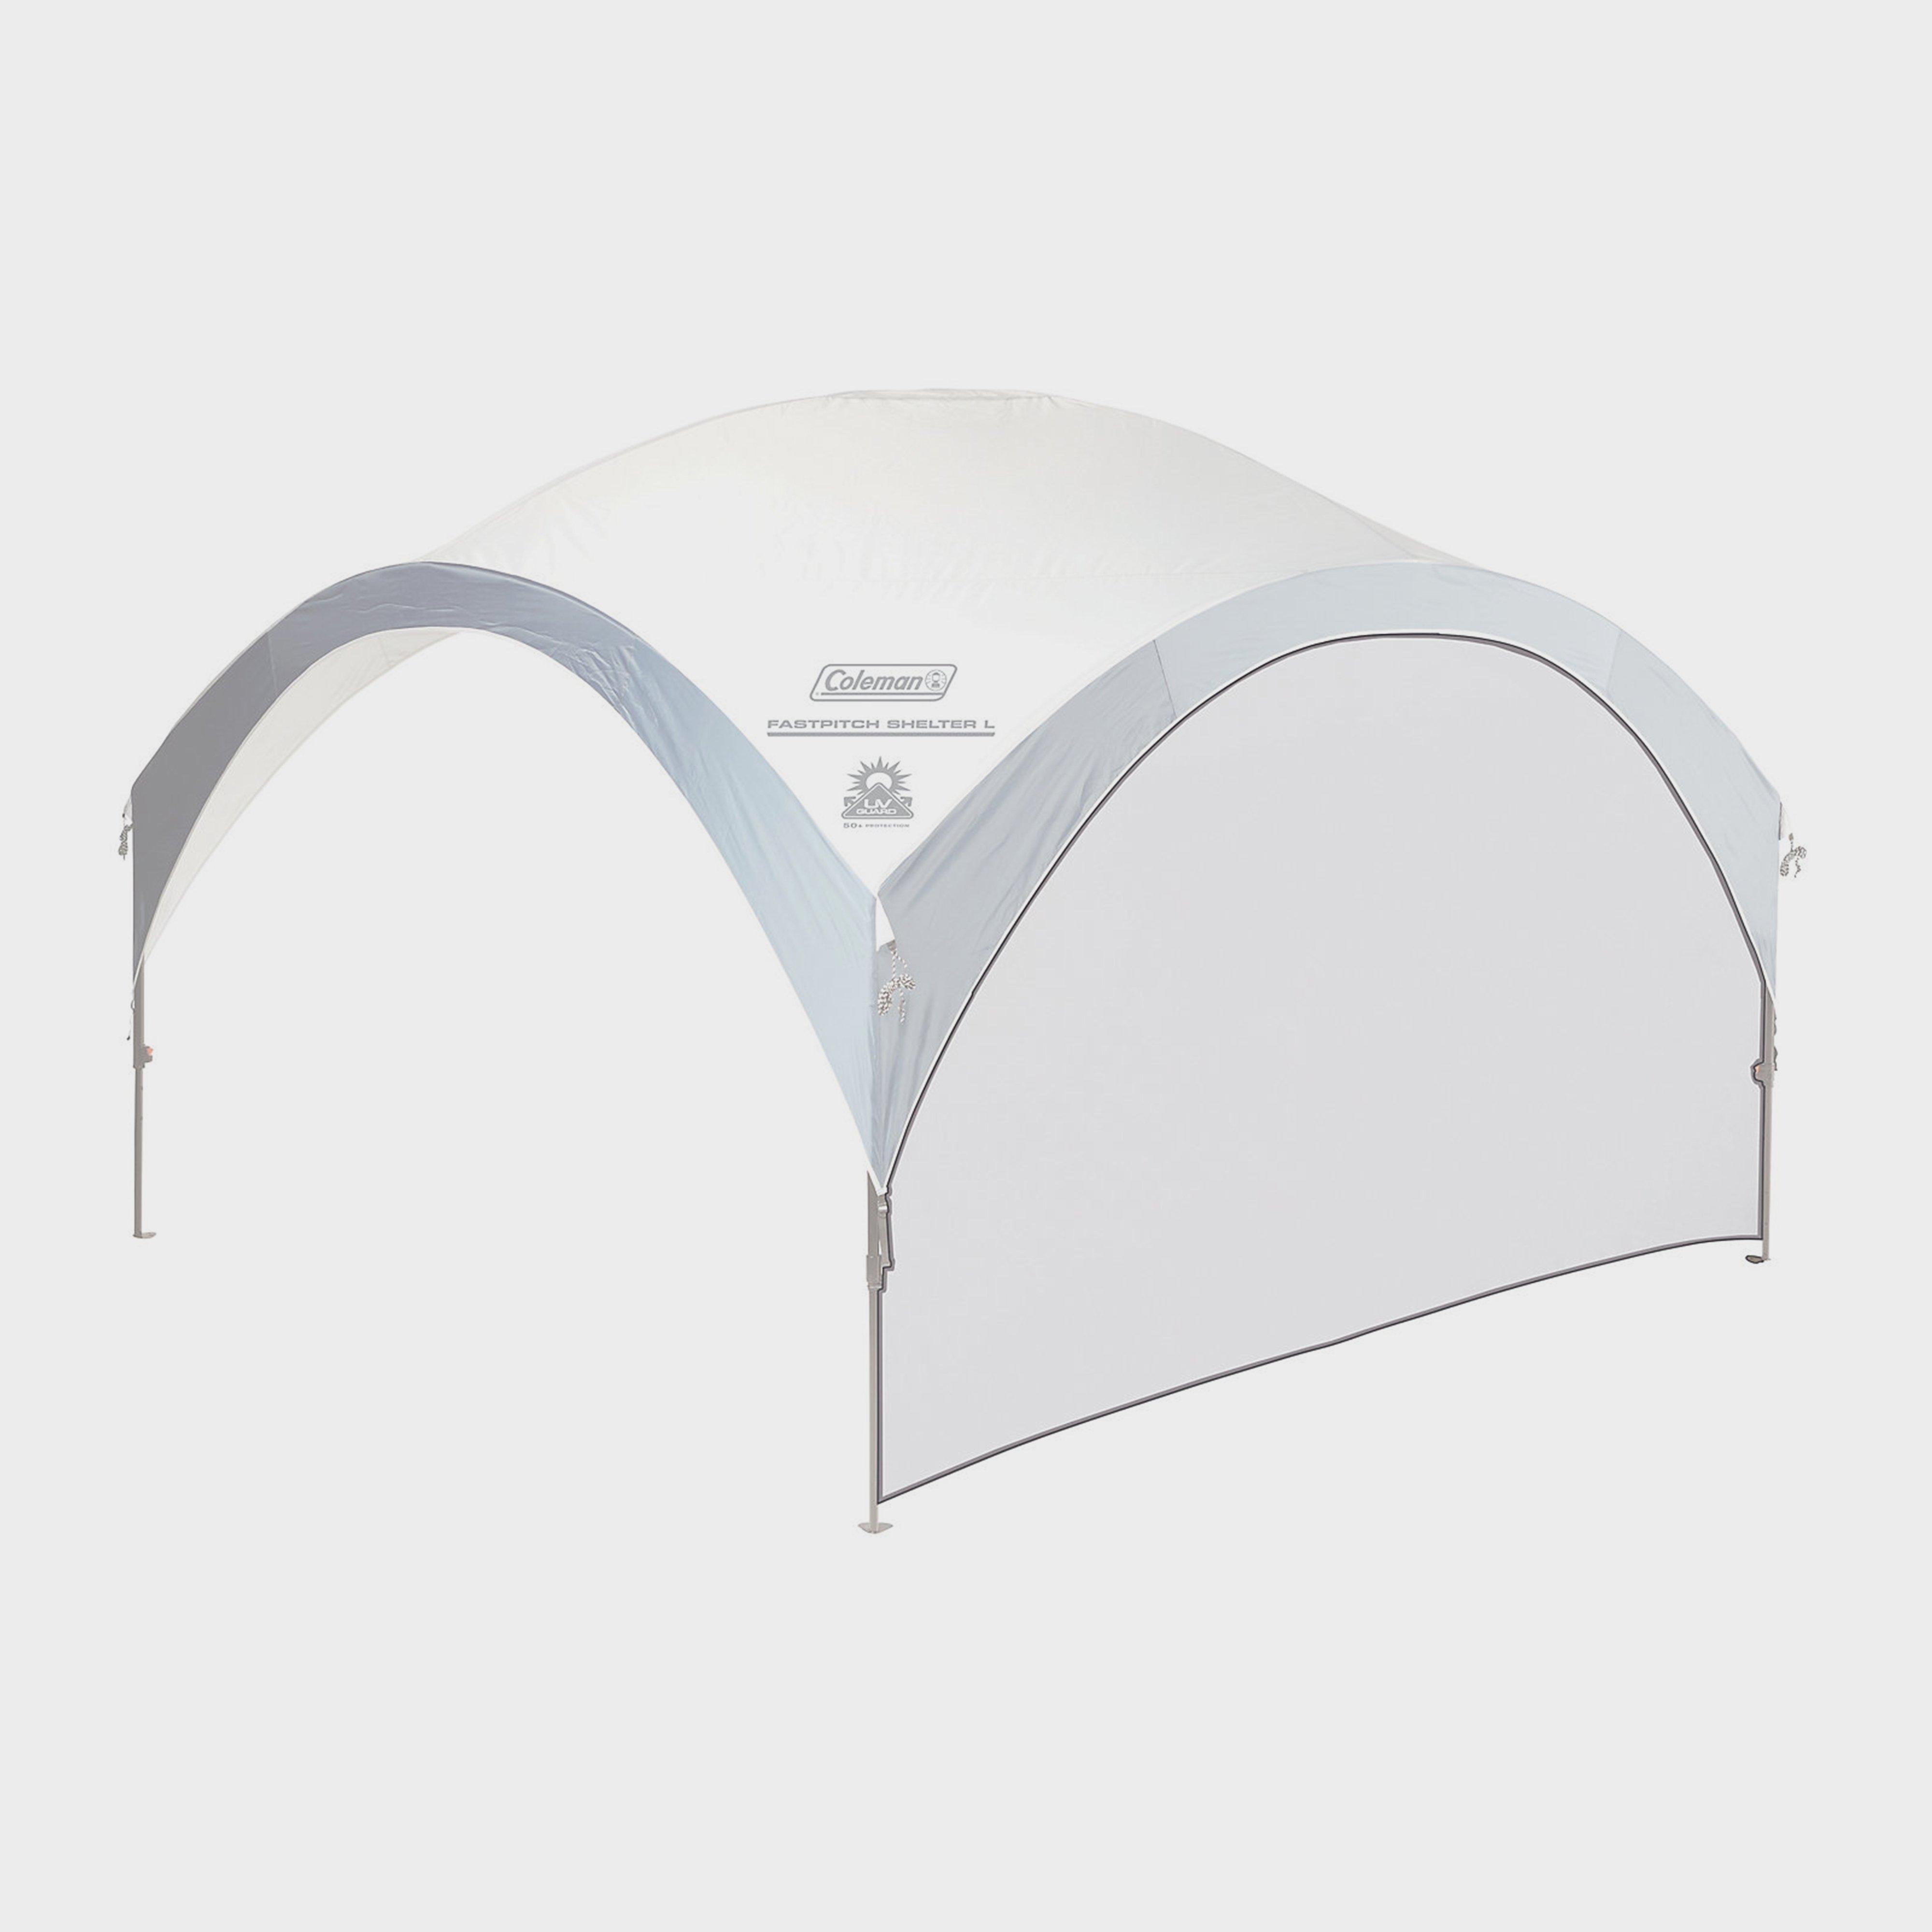 Coleman Fastpitchtm Event Shelter Pro L Sunwall - White, White